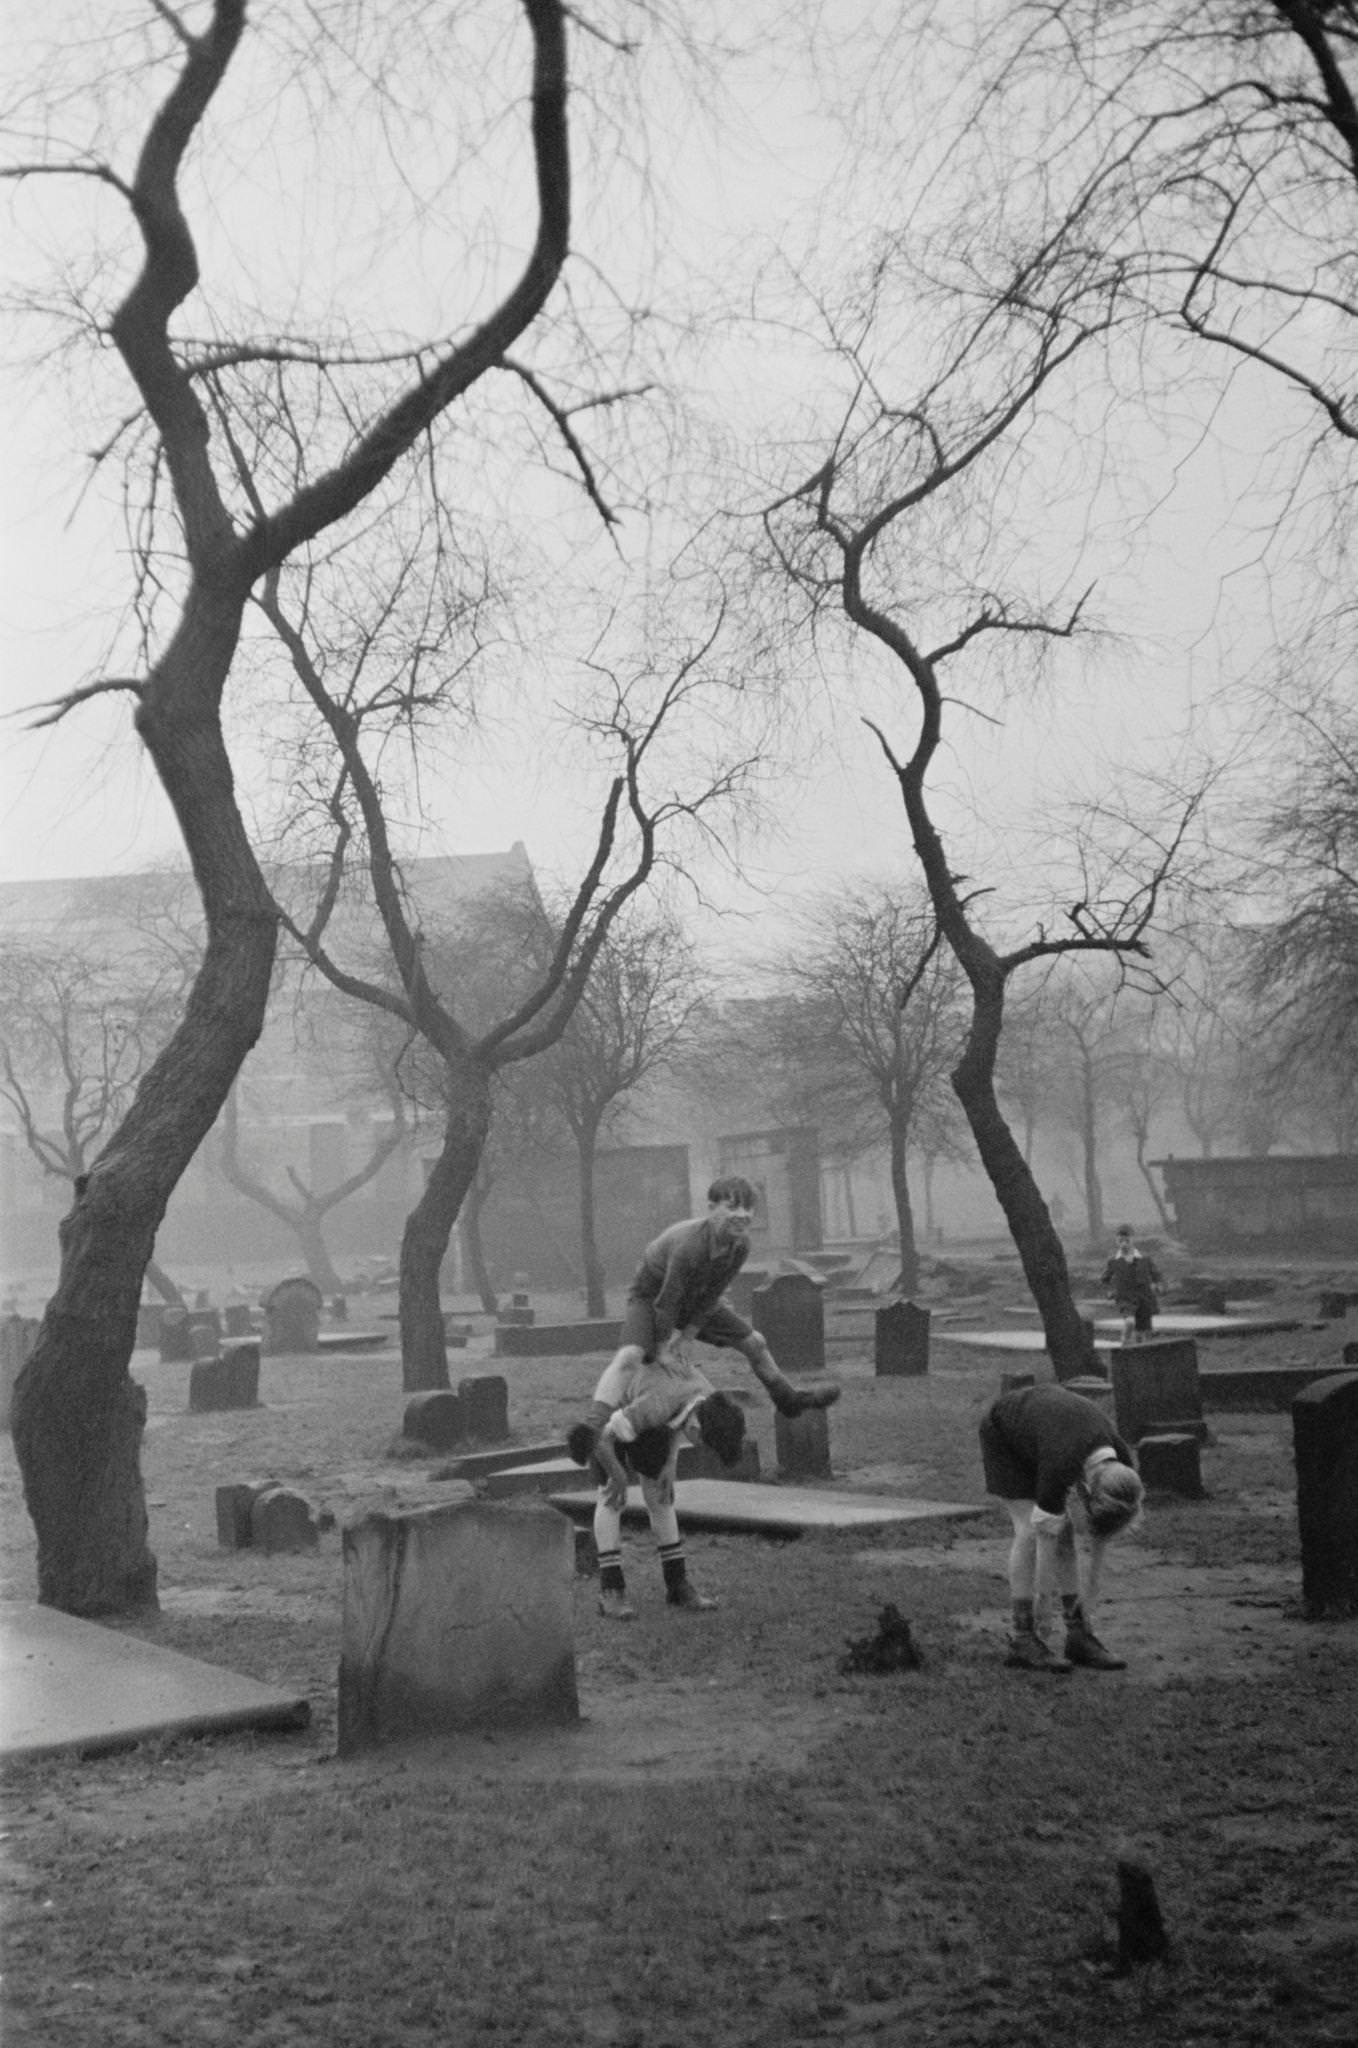 A group of boys playing leapfrog amongst the gravestones of the Corporation Burial Ground in Rutherglen Road, one of the few areas of greenery in the Gorbals, a slum district of Glasgow, 1948.